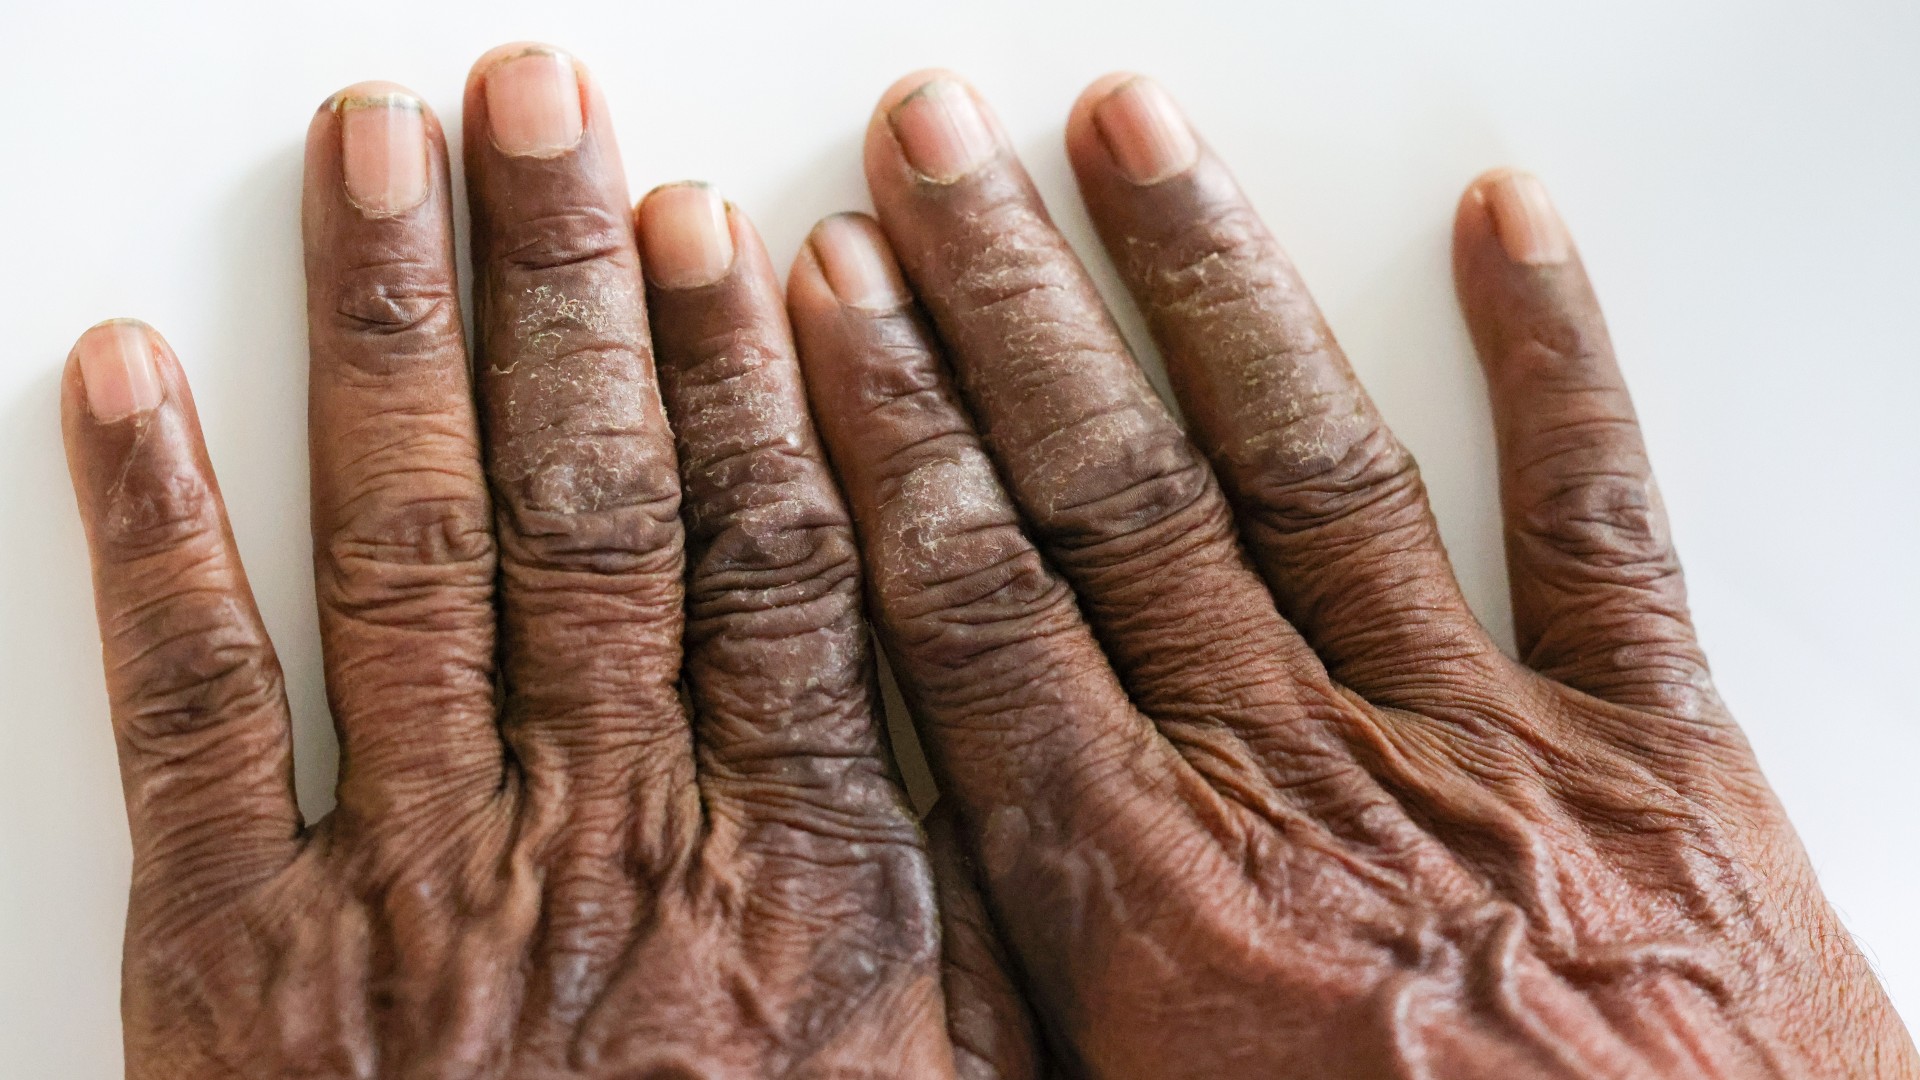 Close up of eczema on the hands of a dark-skinned person